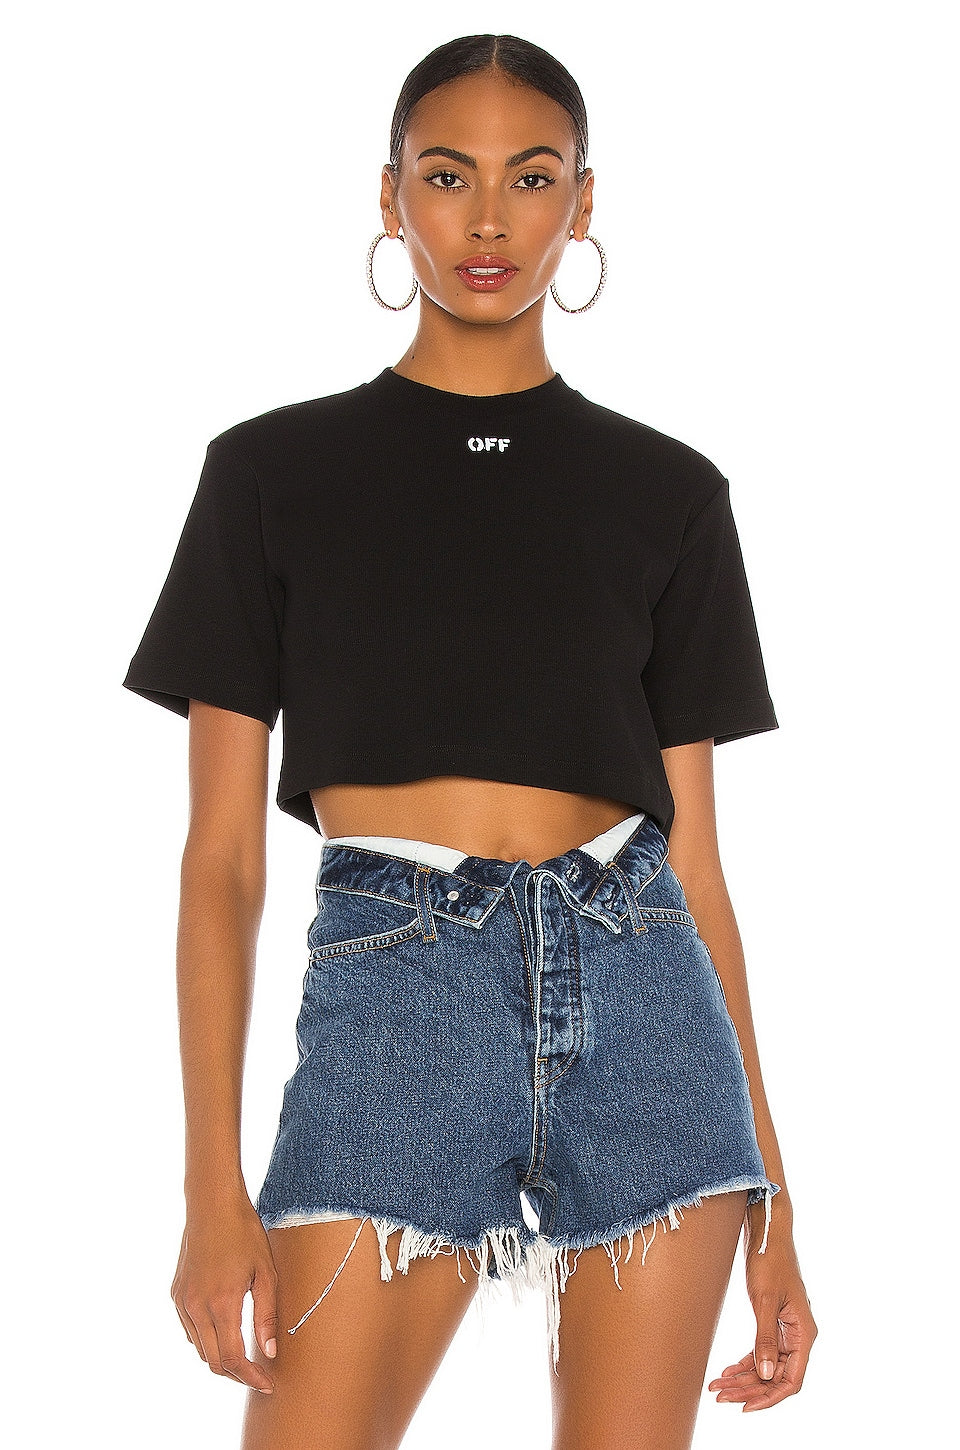 OFF-WHITE Rib Cropped Casual Tee in Black & White Size Small